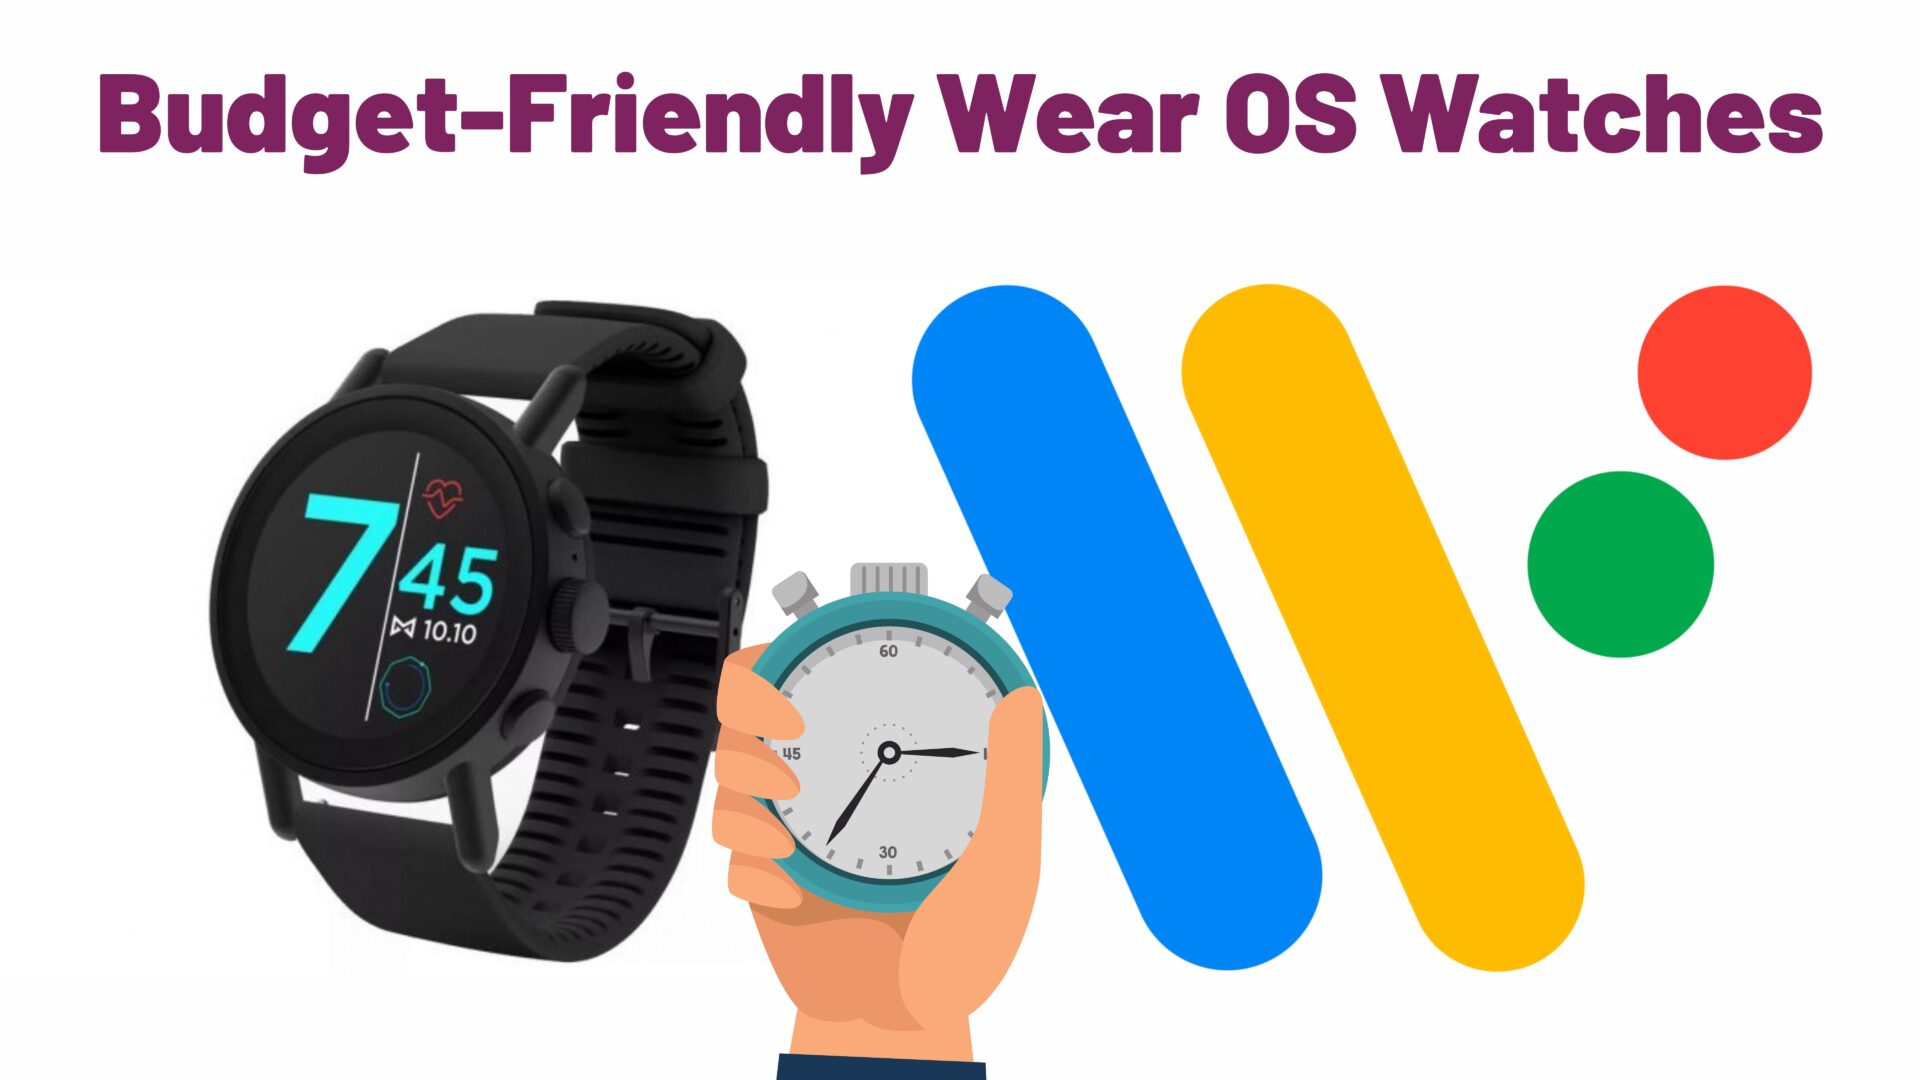 Budget-Friendly Wear OS Watches